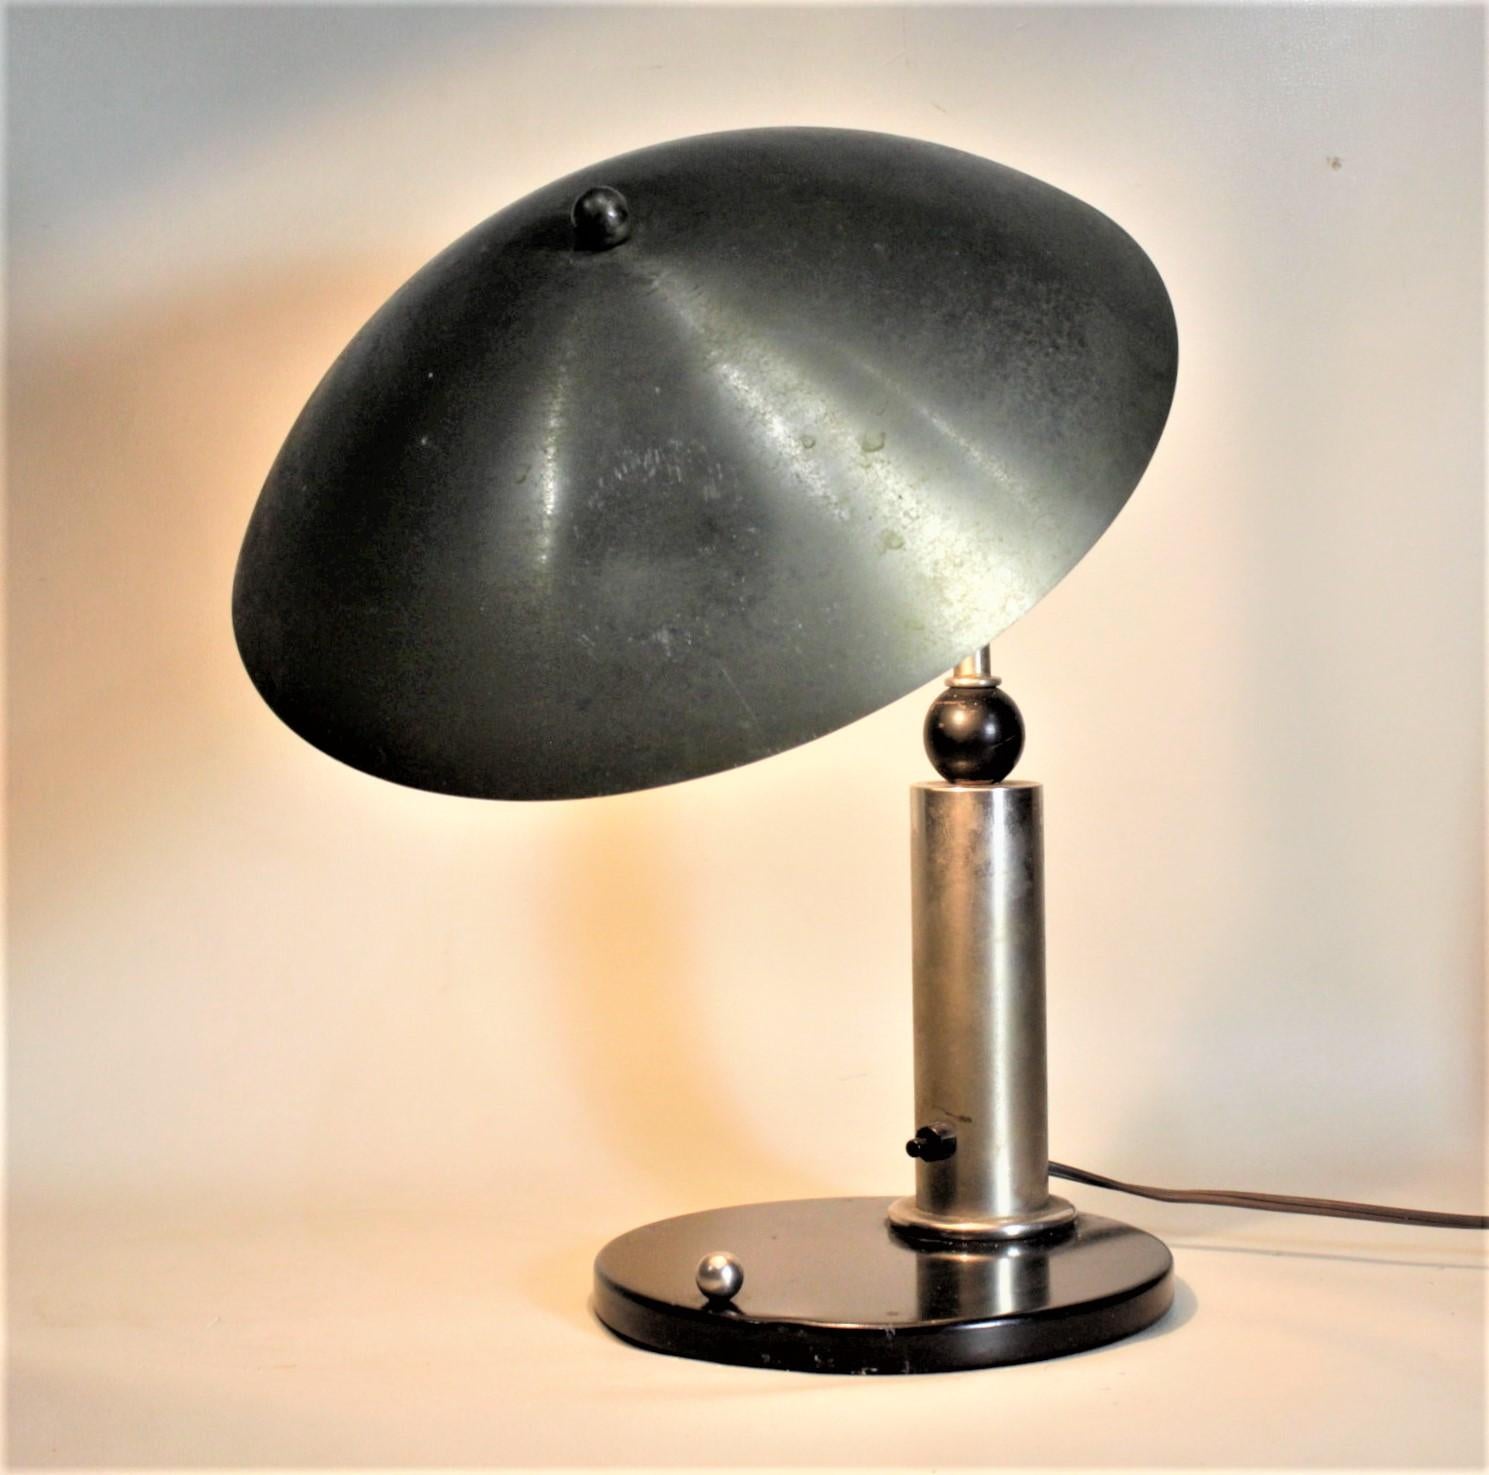 Machine-Made Mid-Century Modern Space Age Flying Saucer Styled Desk or Table Lamp